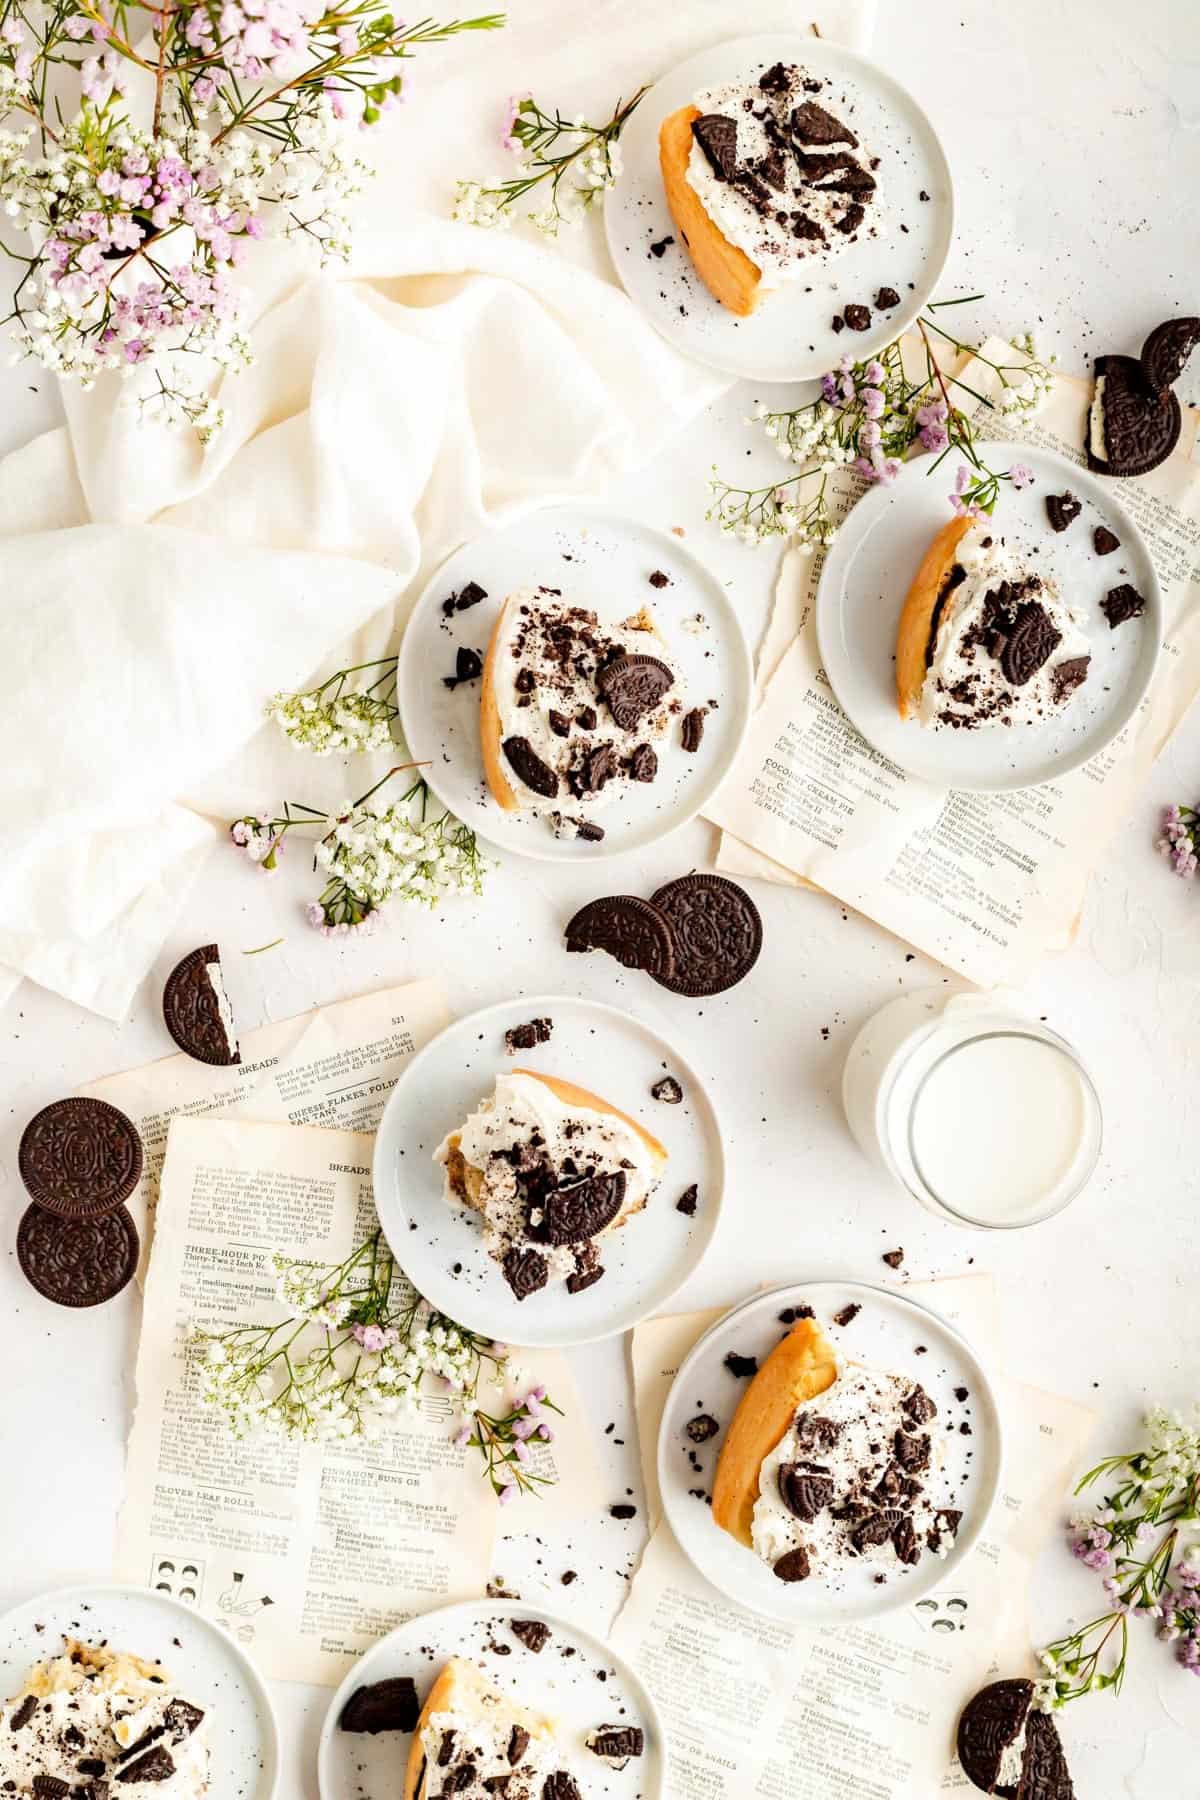 Lots of Oreo cinnamon rolls scattered on a table with recipe pages flowers and Oreos.